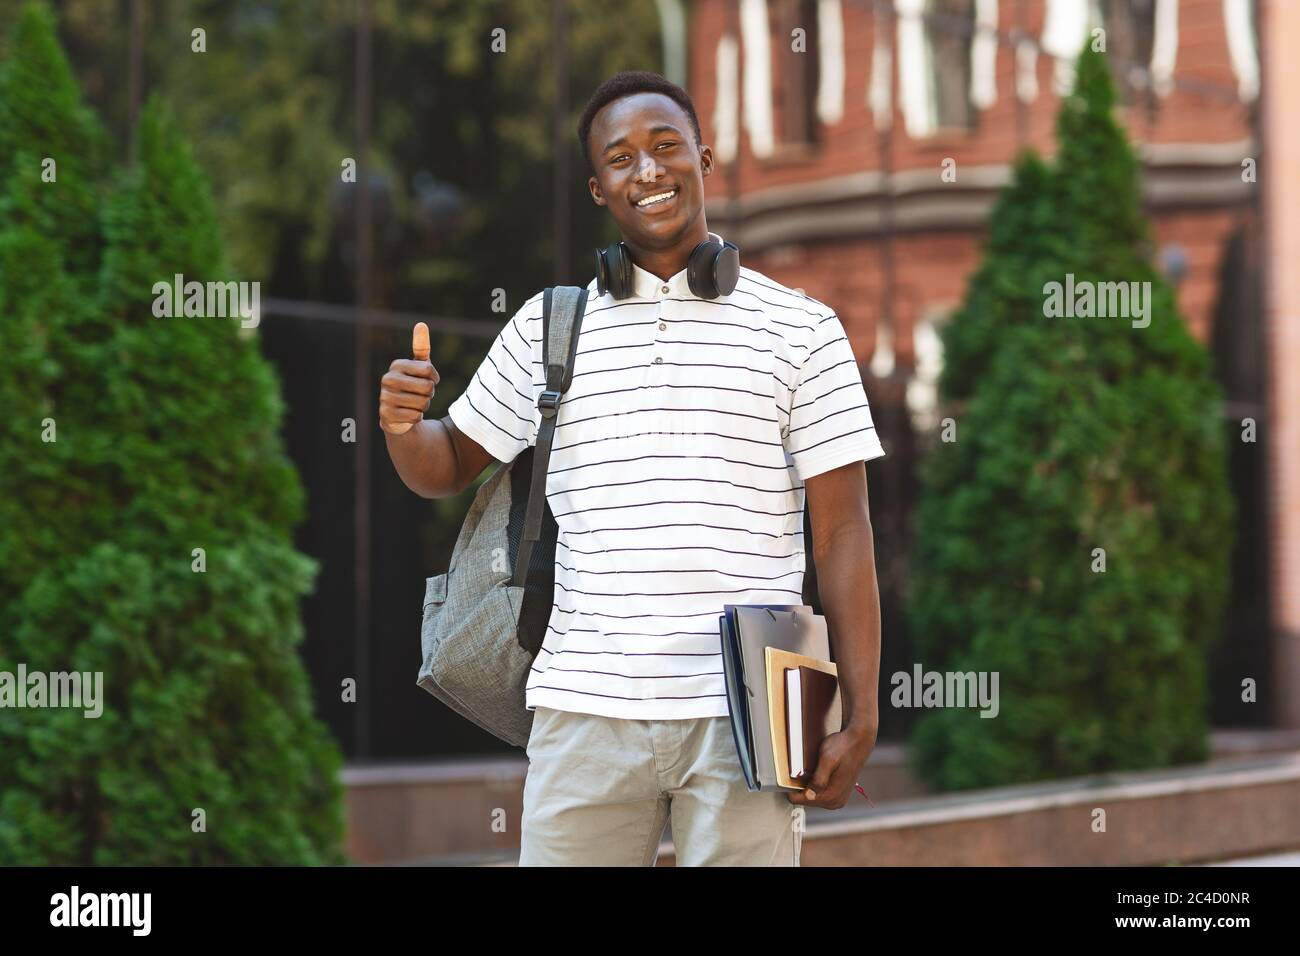 Happy black male student posing outdoors and showing thumb up gesture Stock Photo